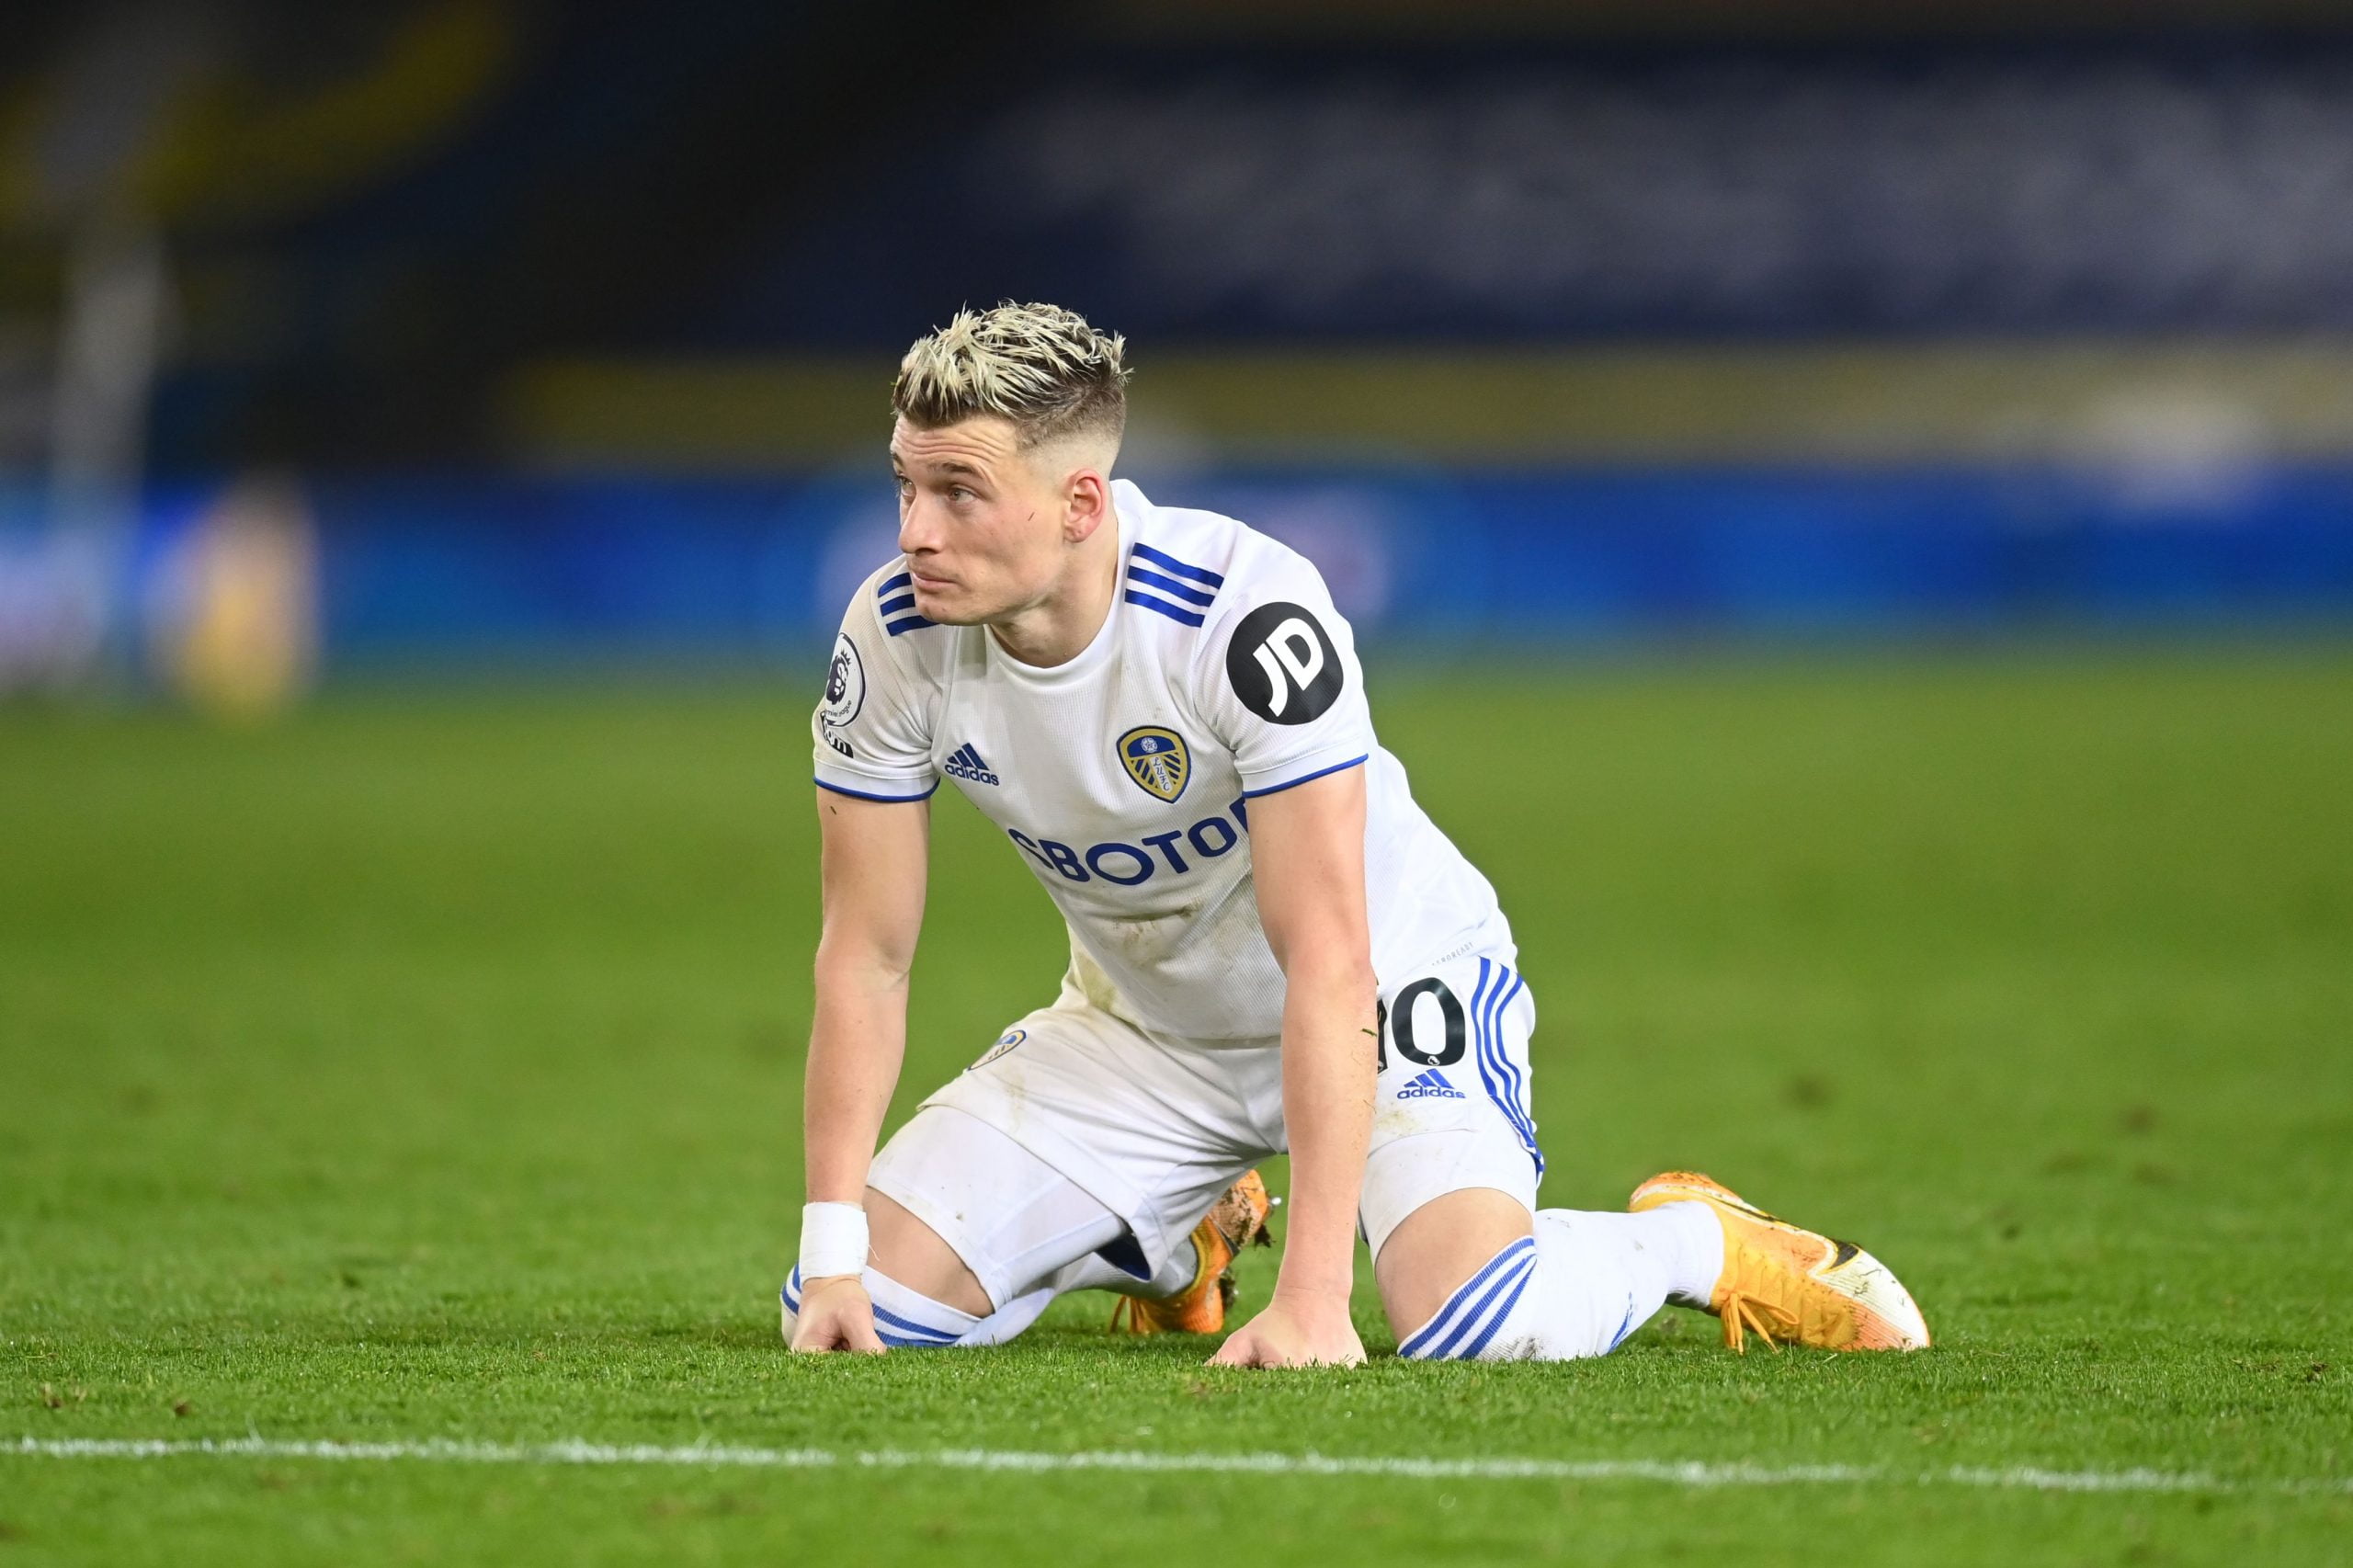 Danny Mills heaps praise on Leeds United's Alioski who is seen in the photo